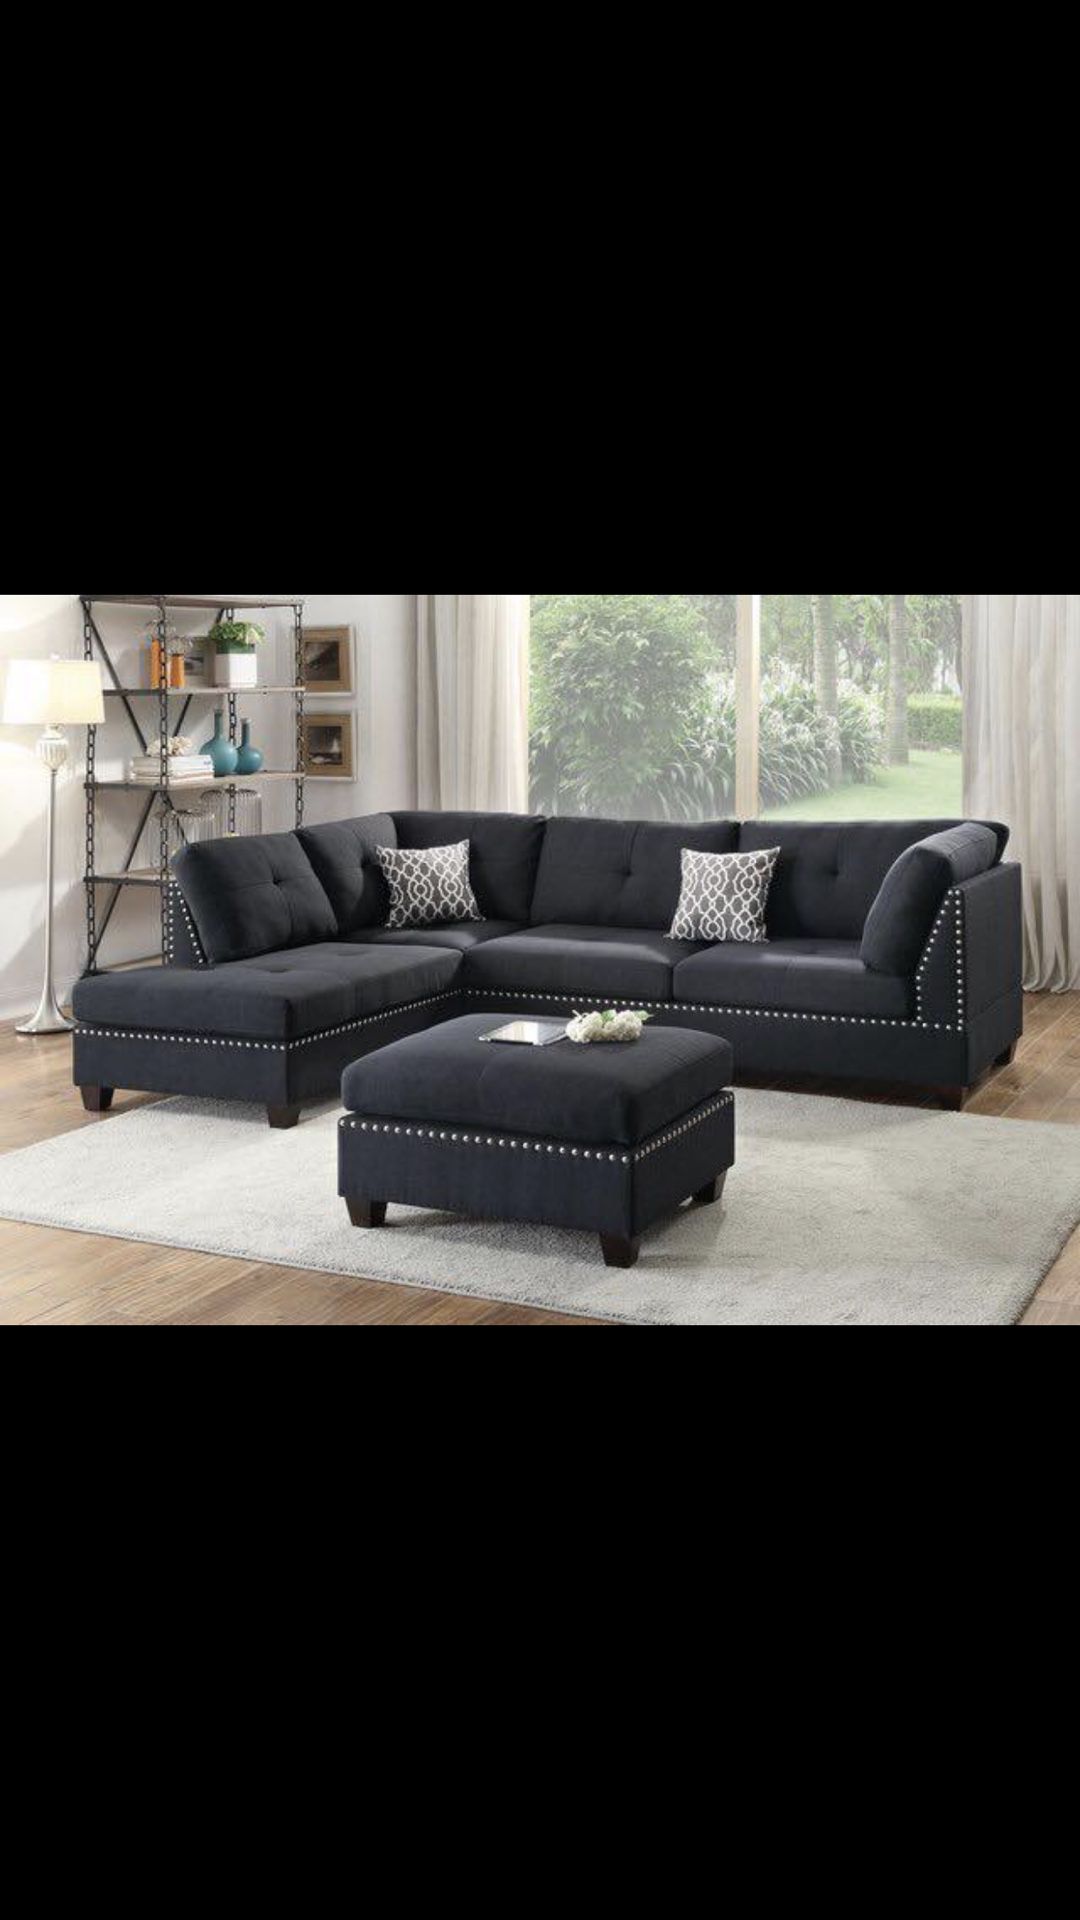 🇺🇸 4th of July BLOWOUT SALE💥3 DAYS ONLY 🇺🇸 black sectional